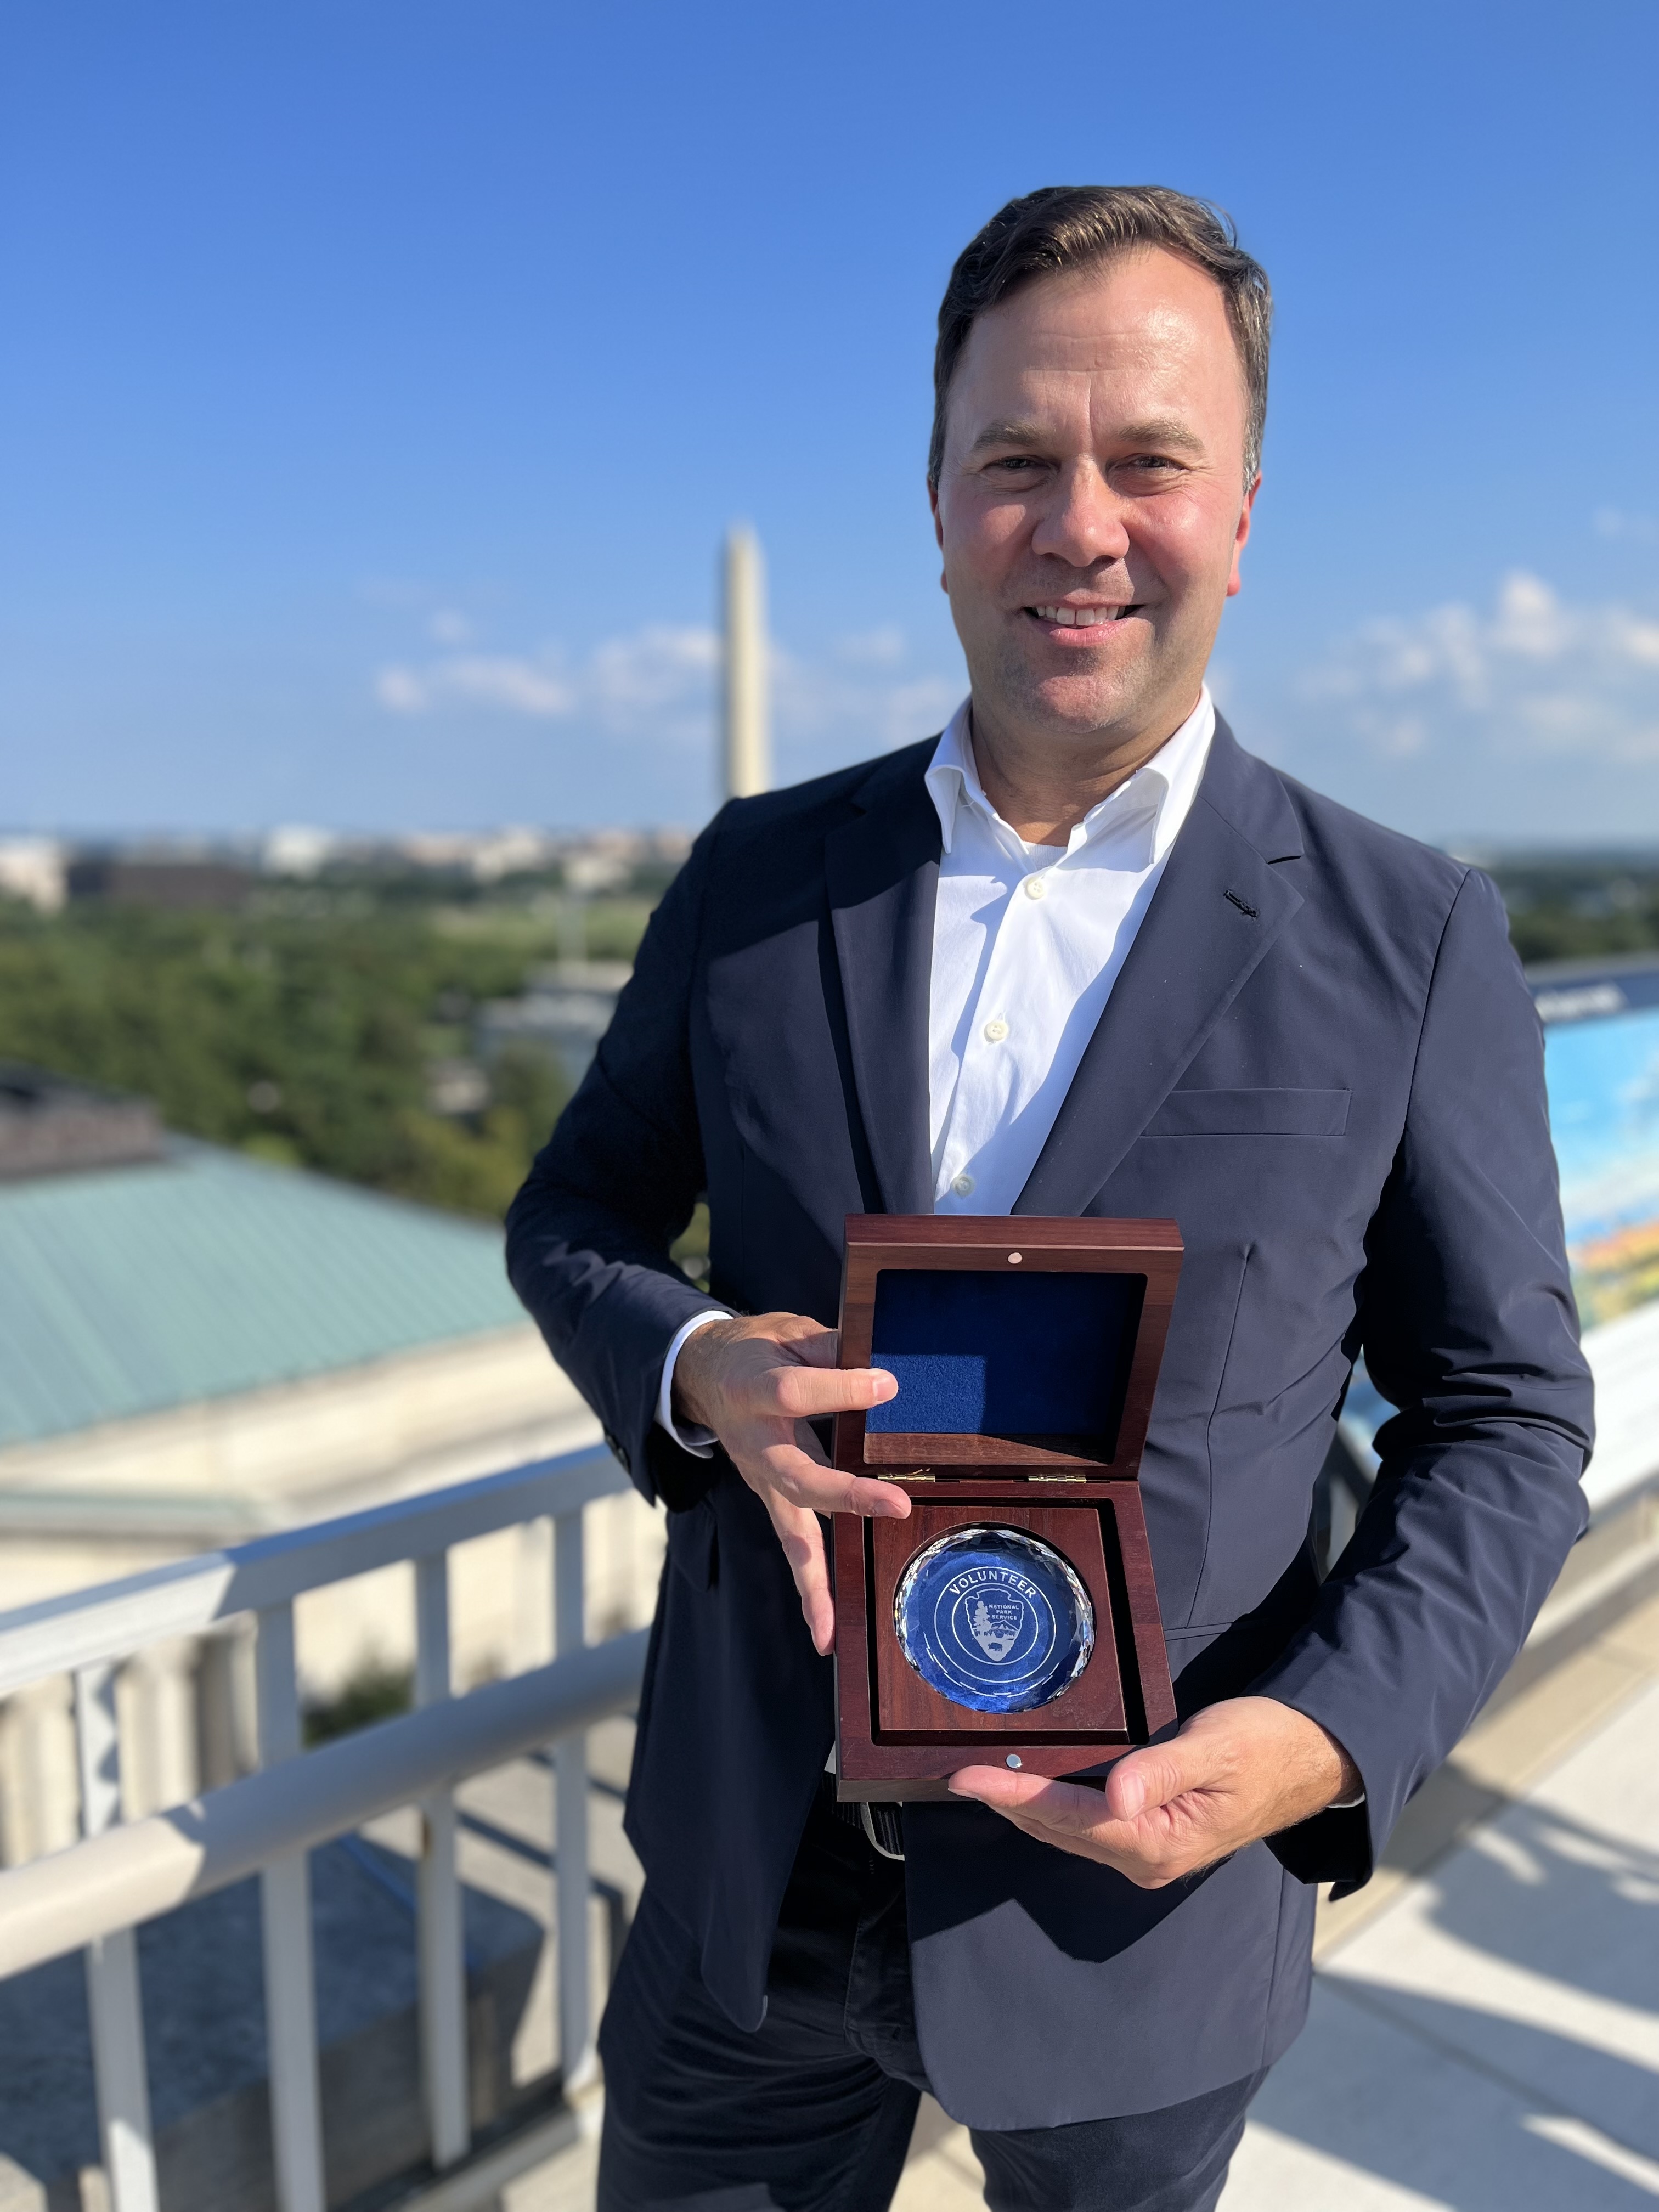 Man holding an award with Washington Monument in background